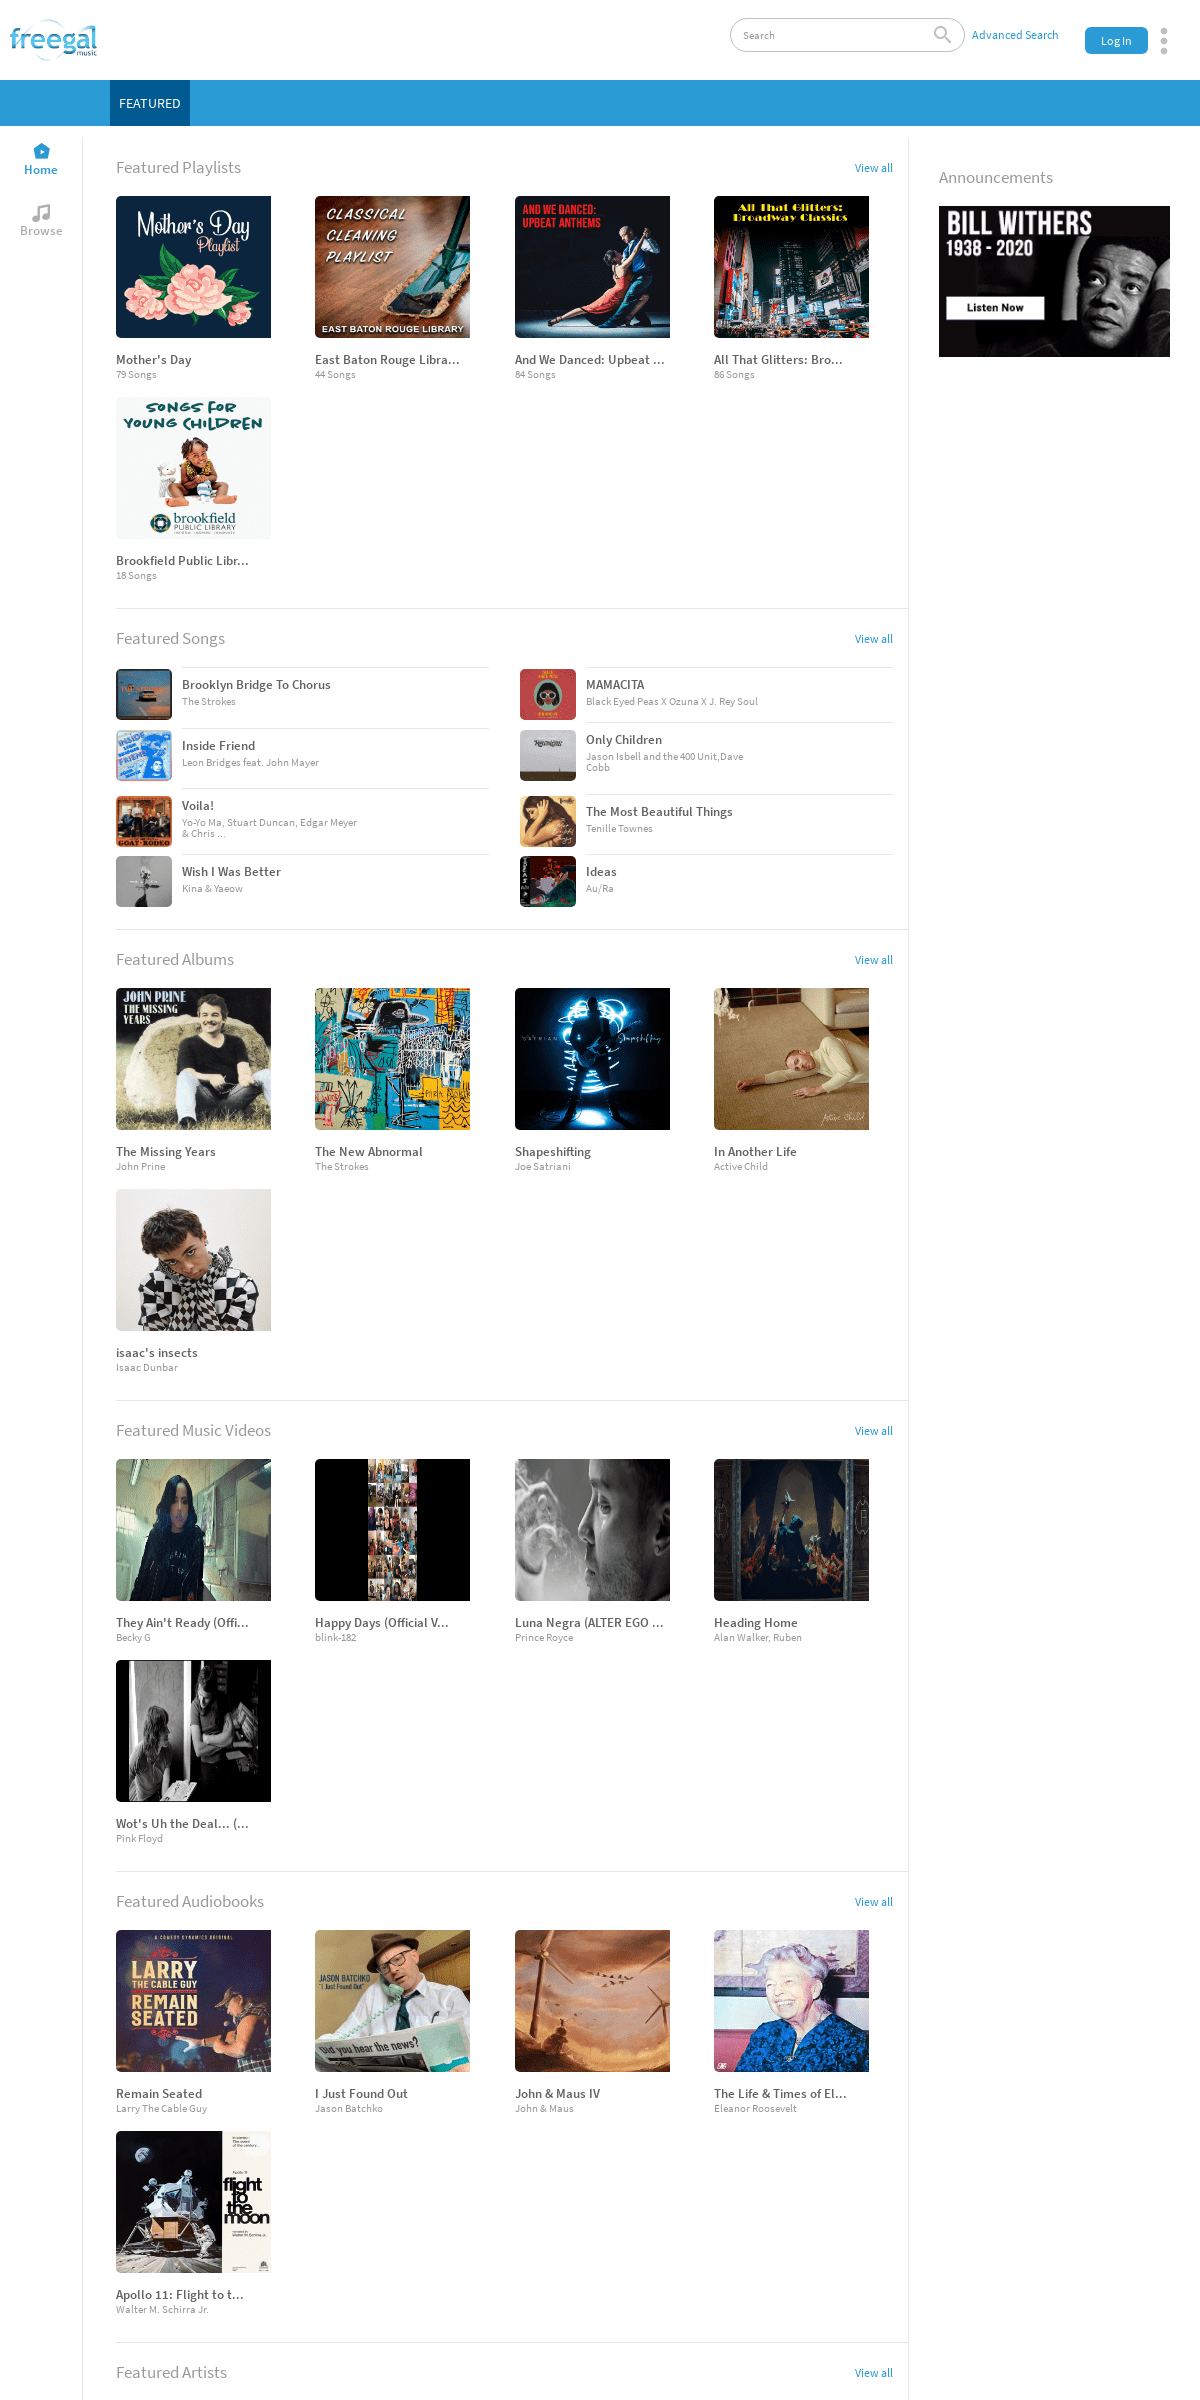 A complete backup of freegalmusic.com